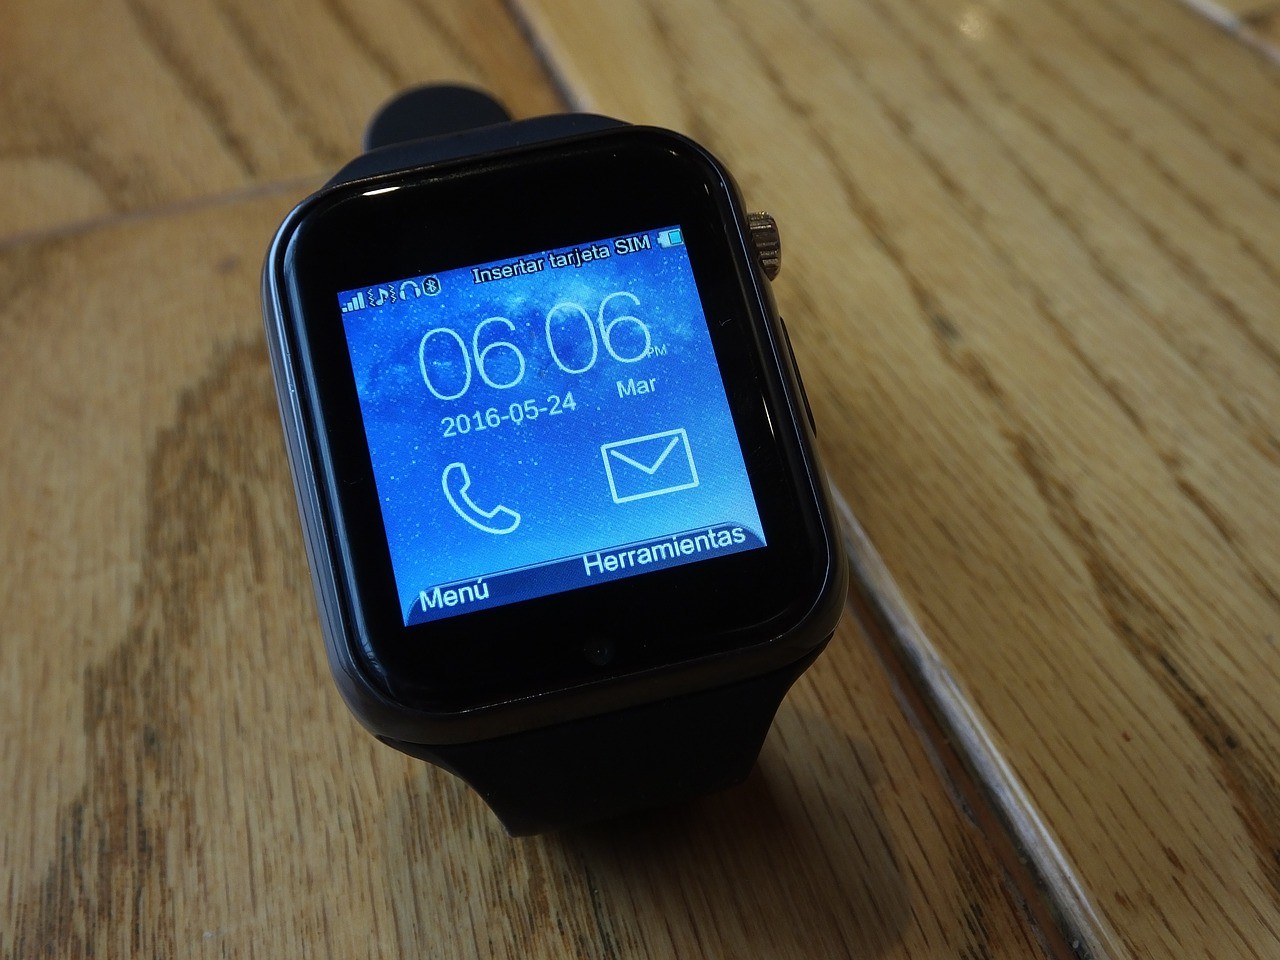 calling and messaging features in smartwatches